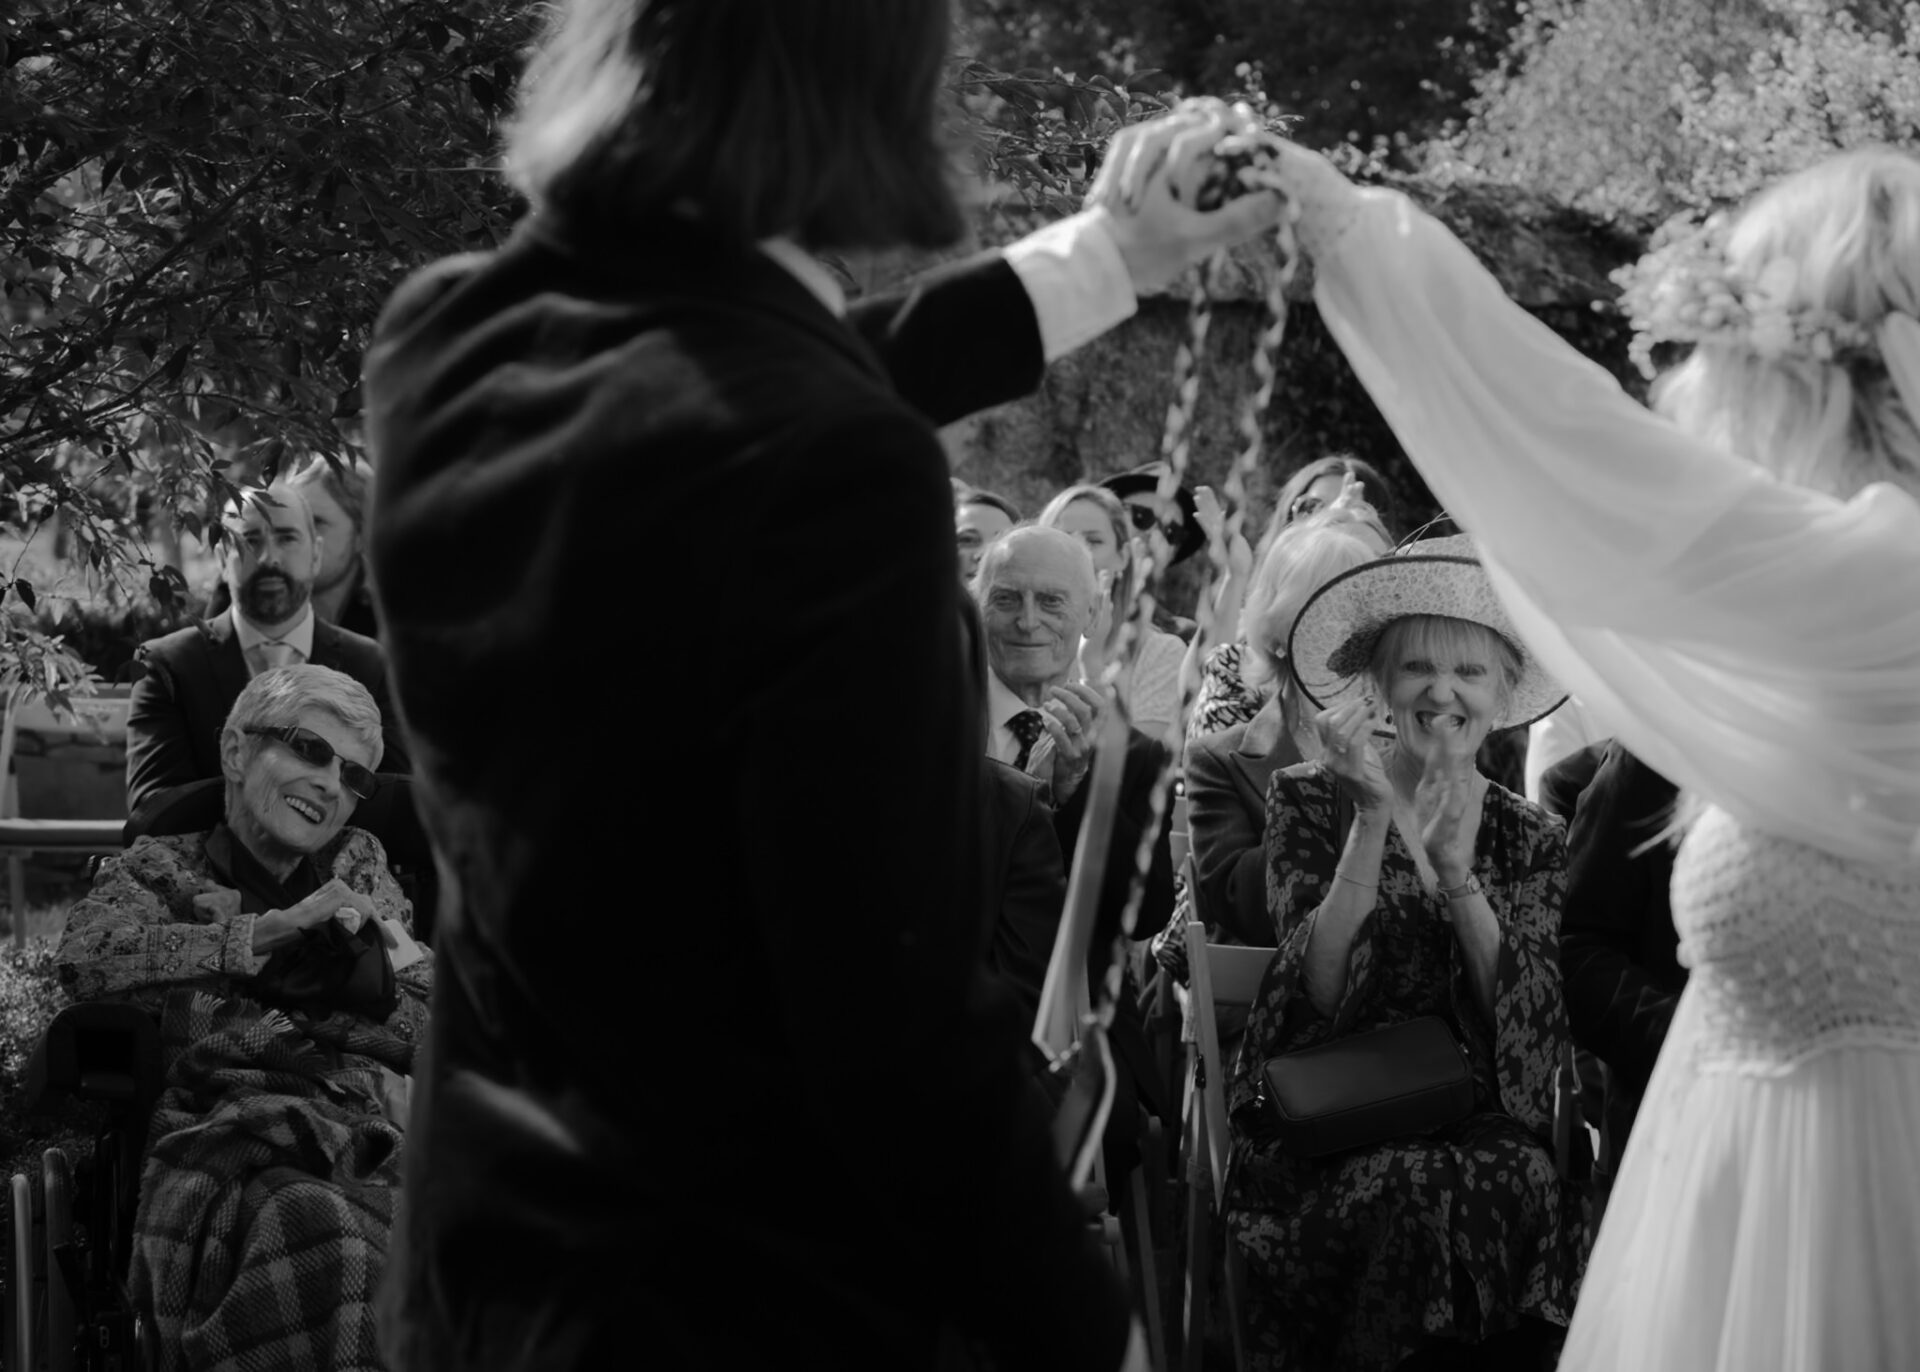 A black-and-white photo of a bride and groom holding hands at an outdoor wedding, with joyful guests watching, is part of our exclusive wedding photography collections.